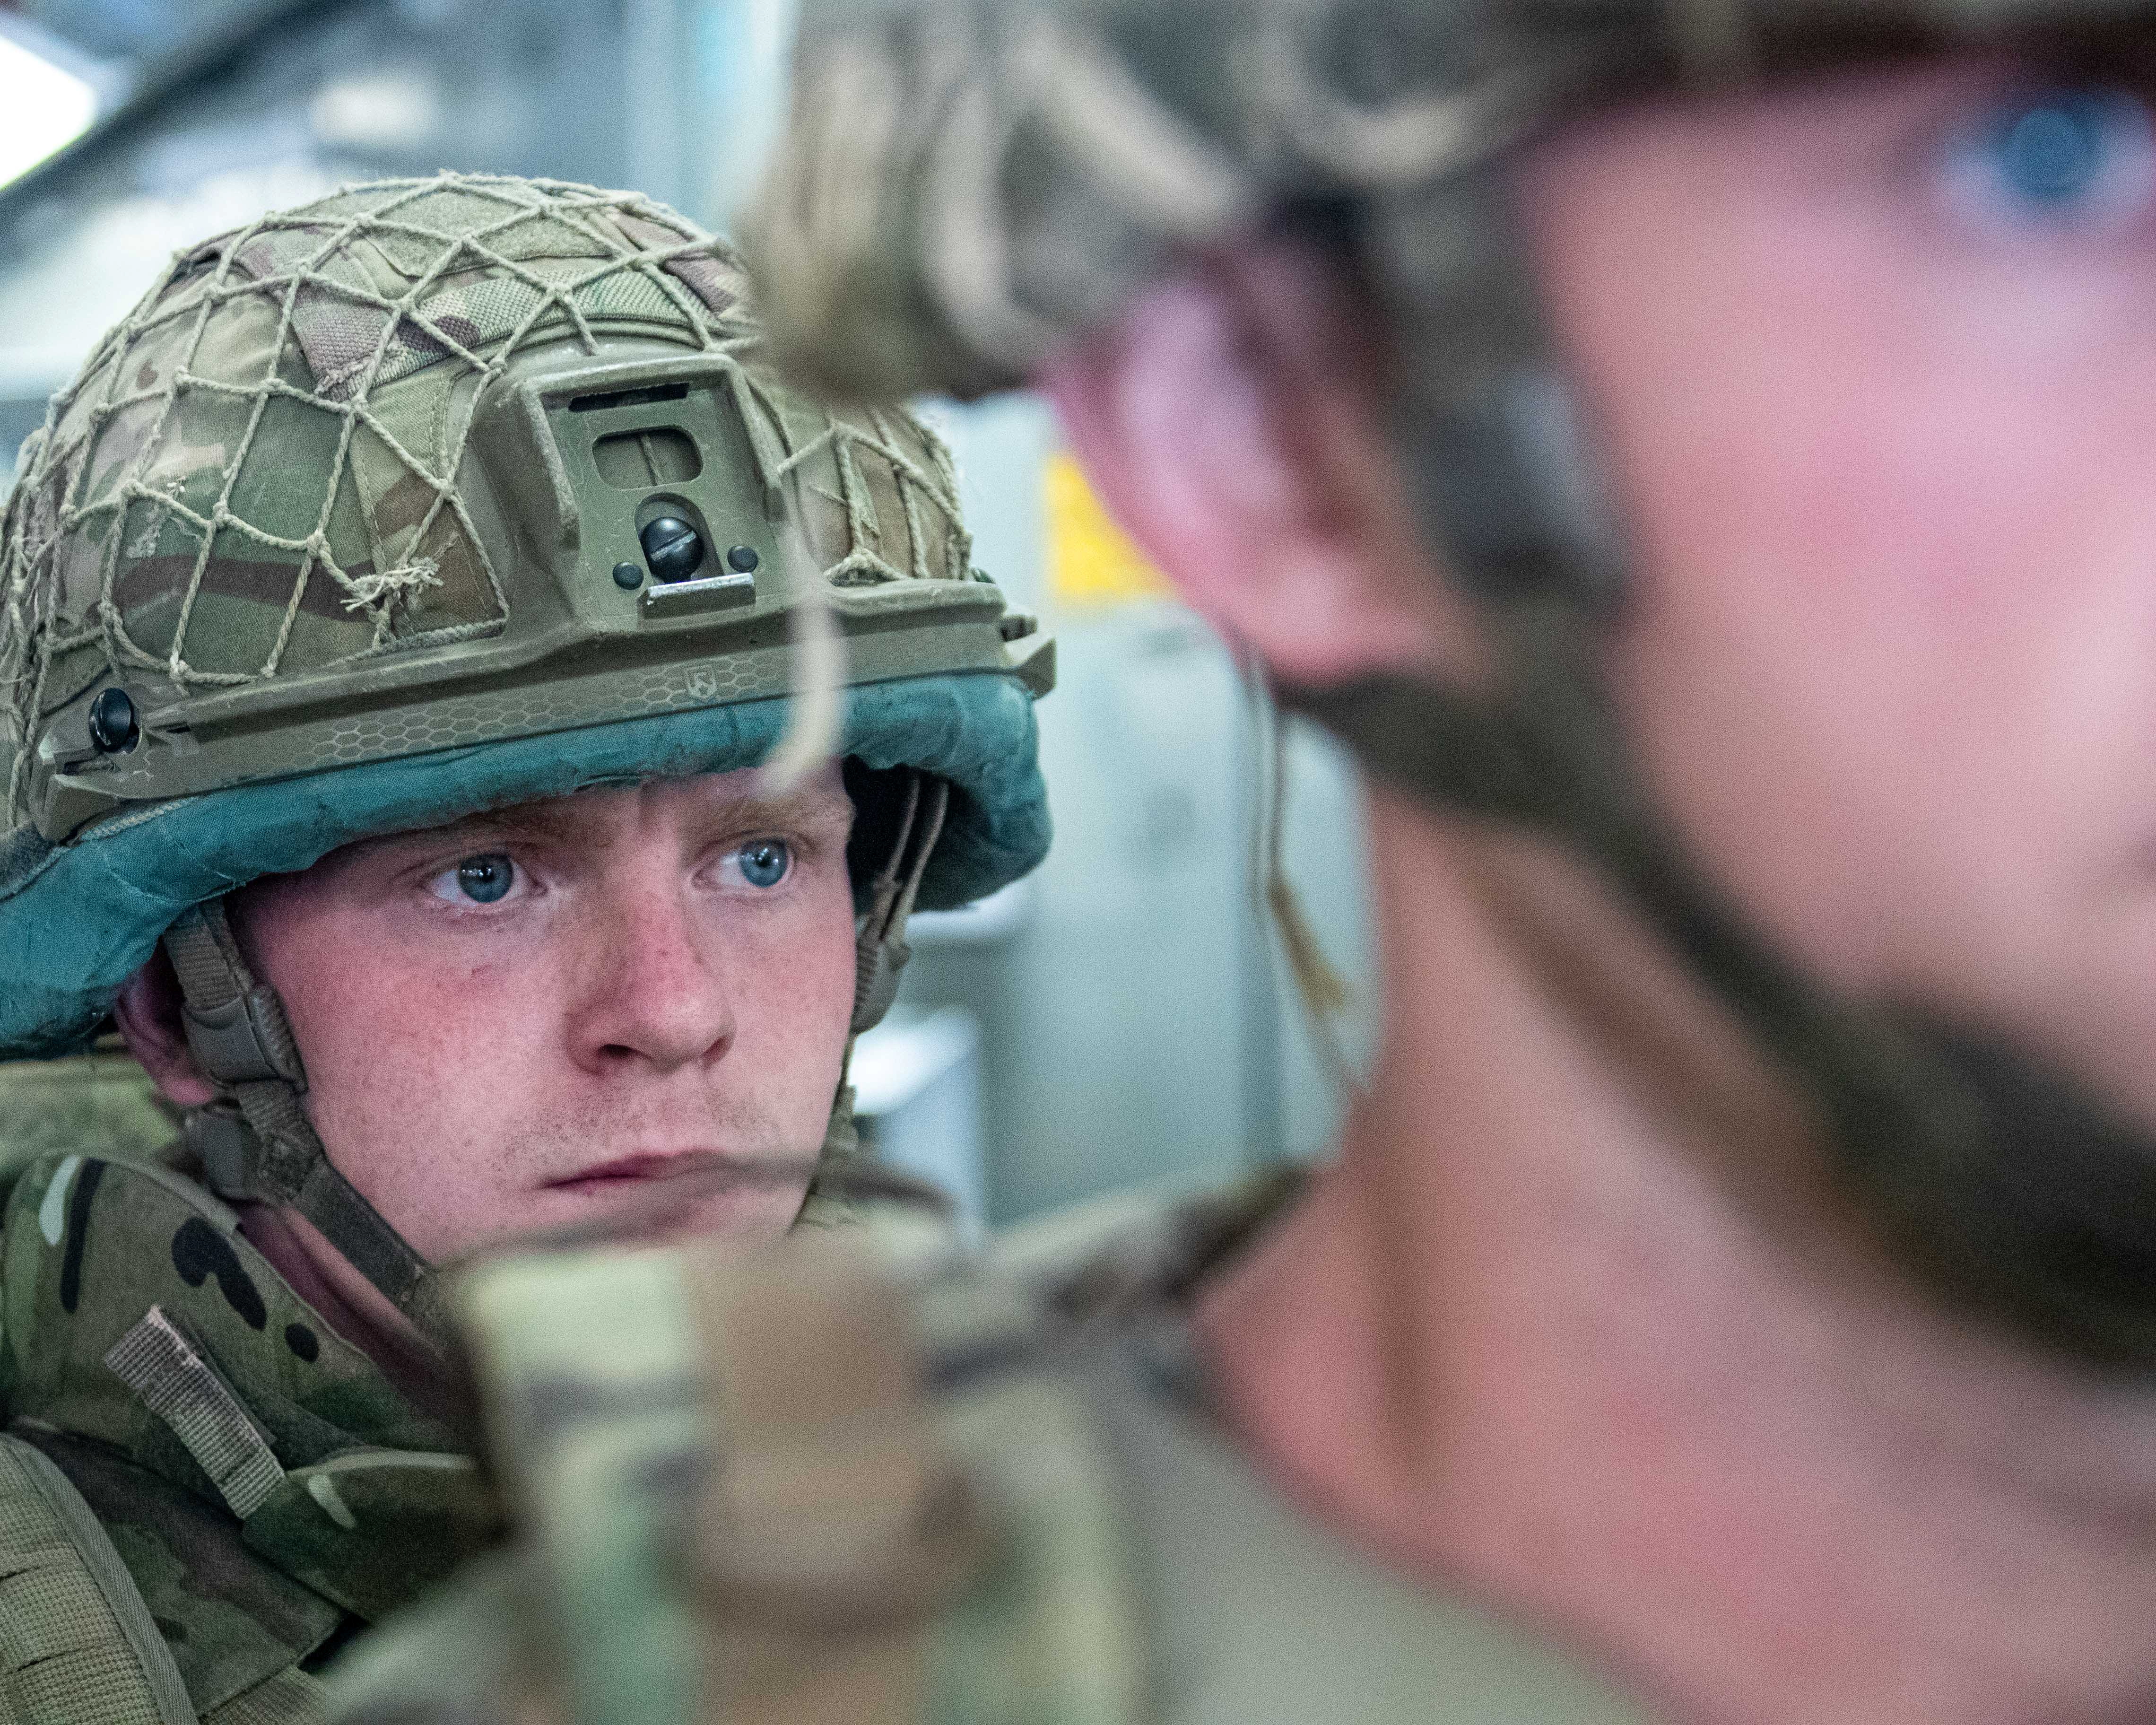 A member of British Forces from 16 Air Assault Brigade looks on upon arrival in Kabul, Afghanistan, to provide support to British nationals leaving the country